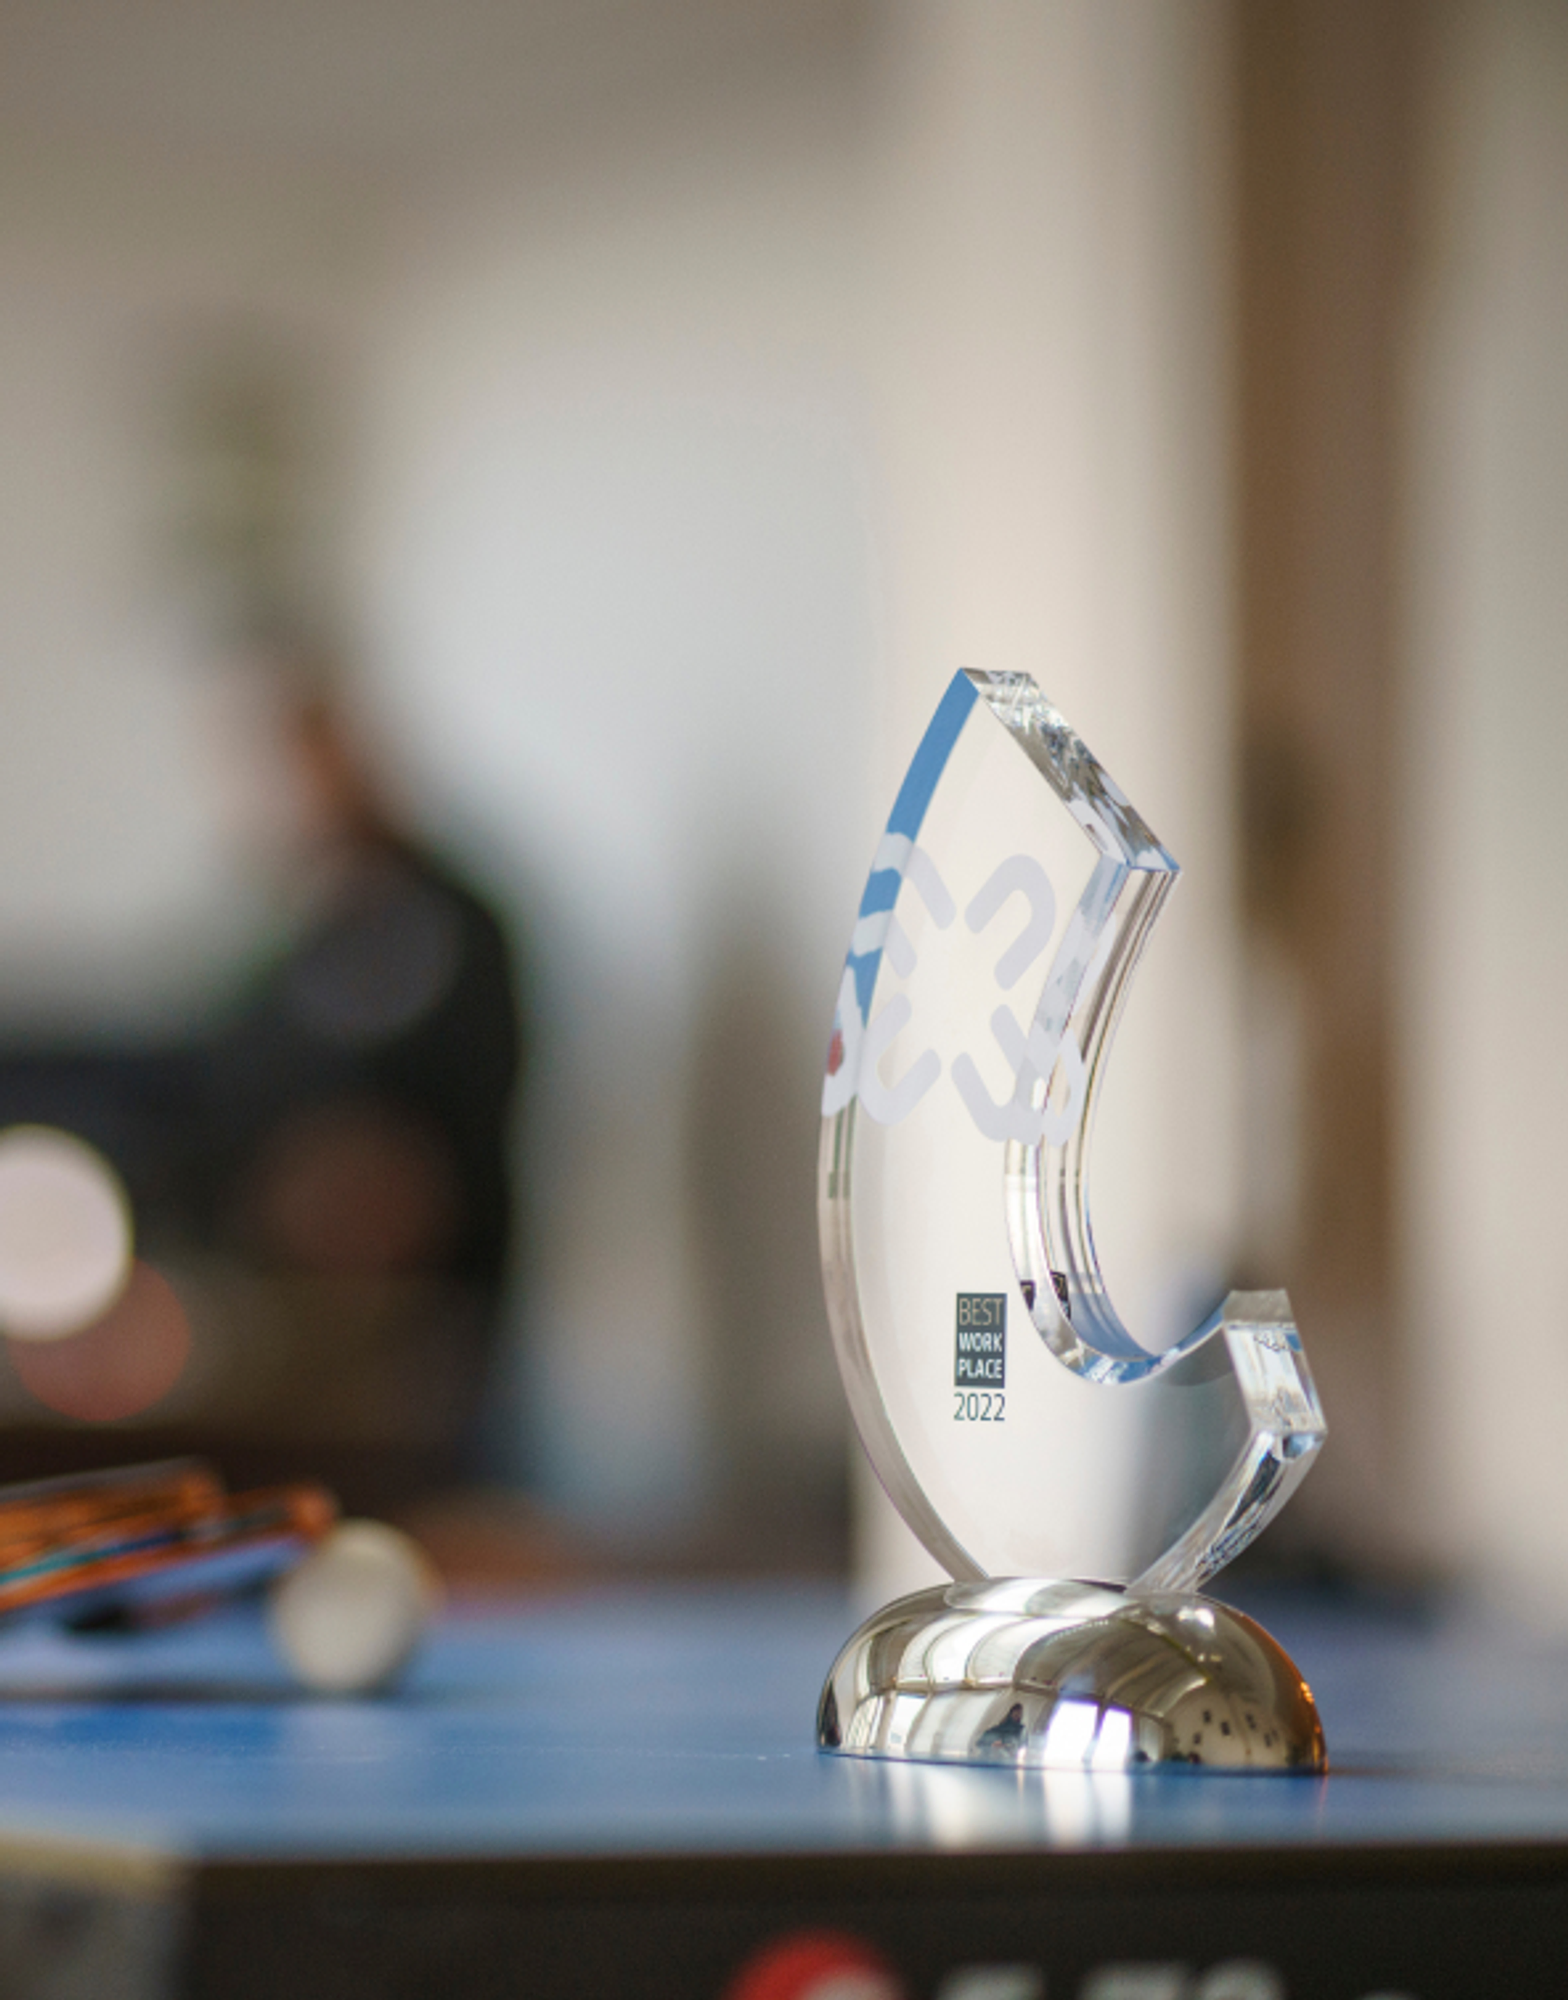 Glass award statue depicting the "Best Workplace Award" winner of 2022